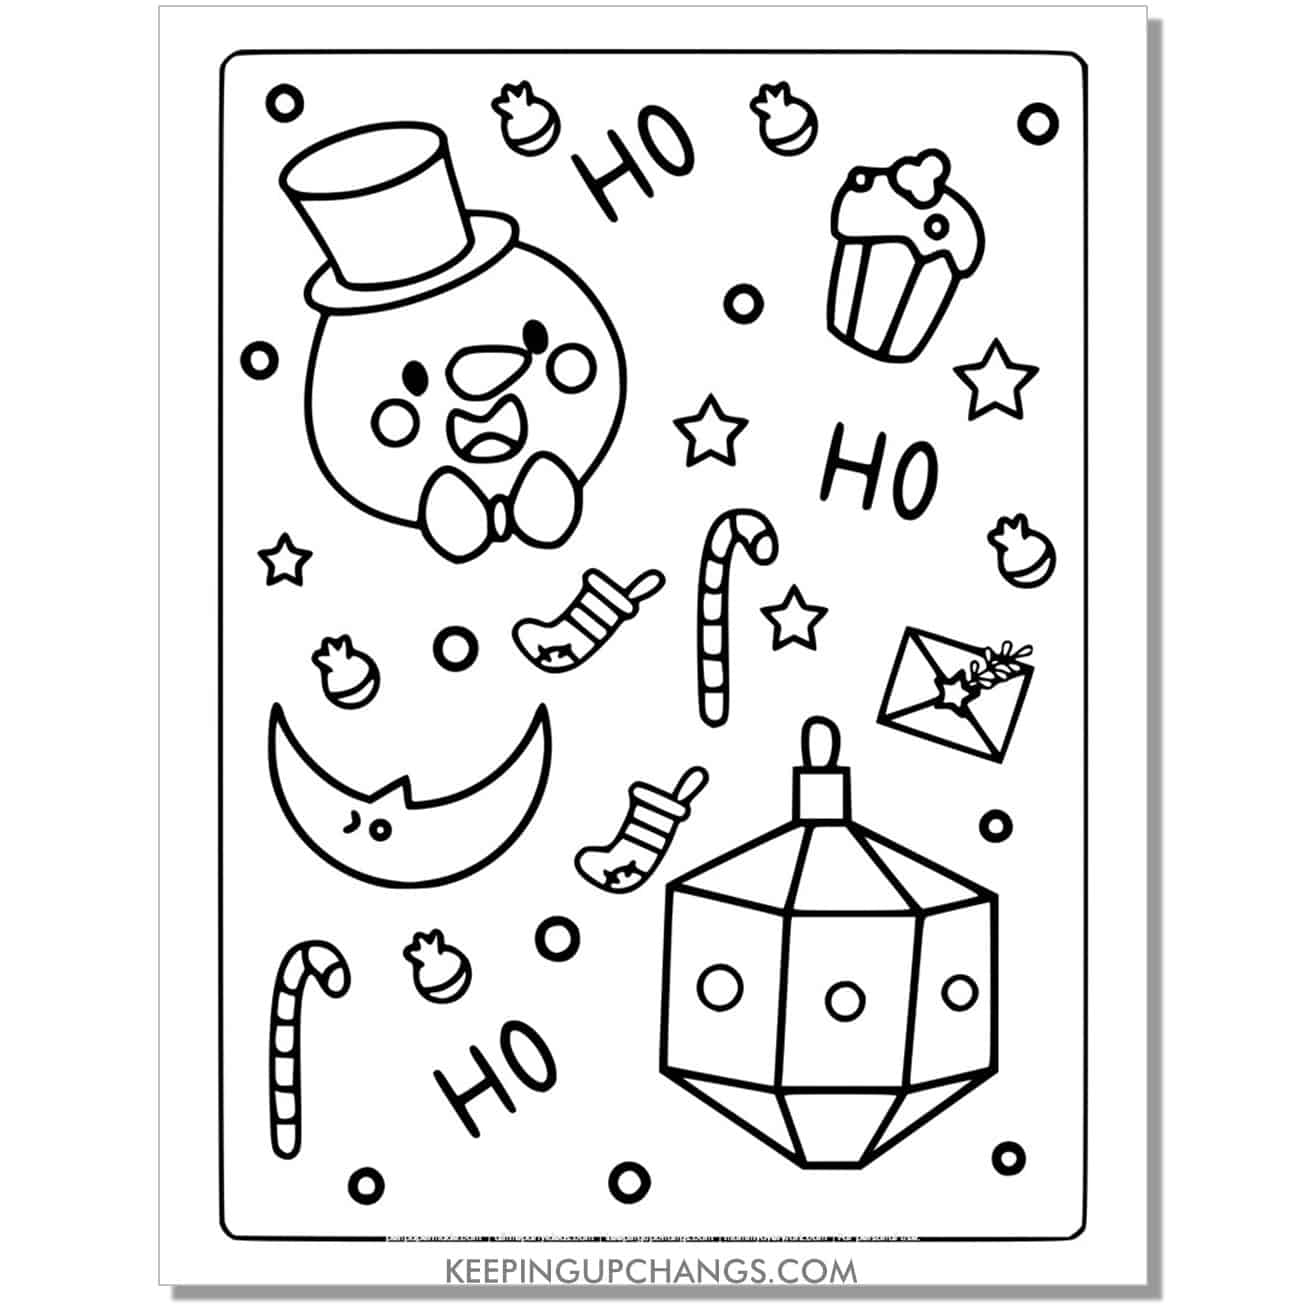 free detailed, full size snowman with stockings, candy canes coloring page.